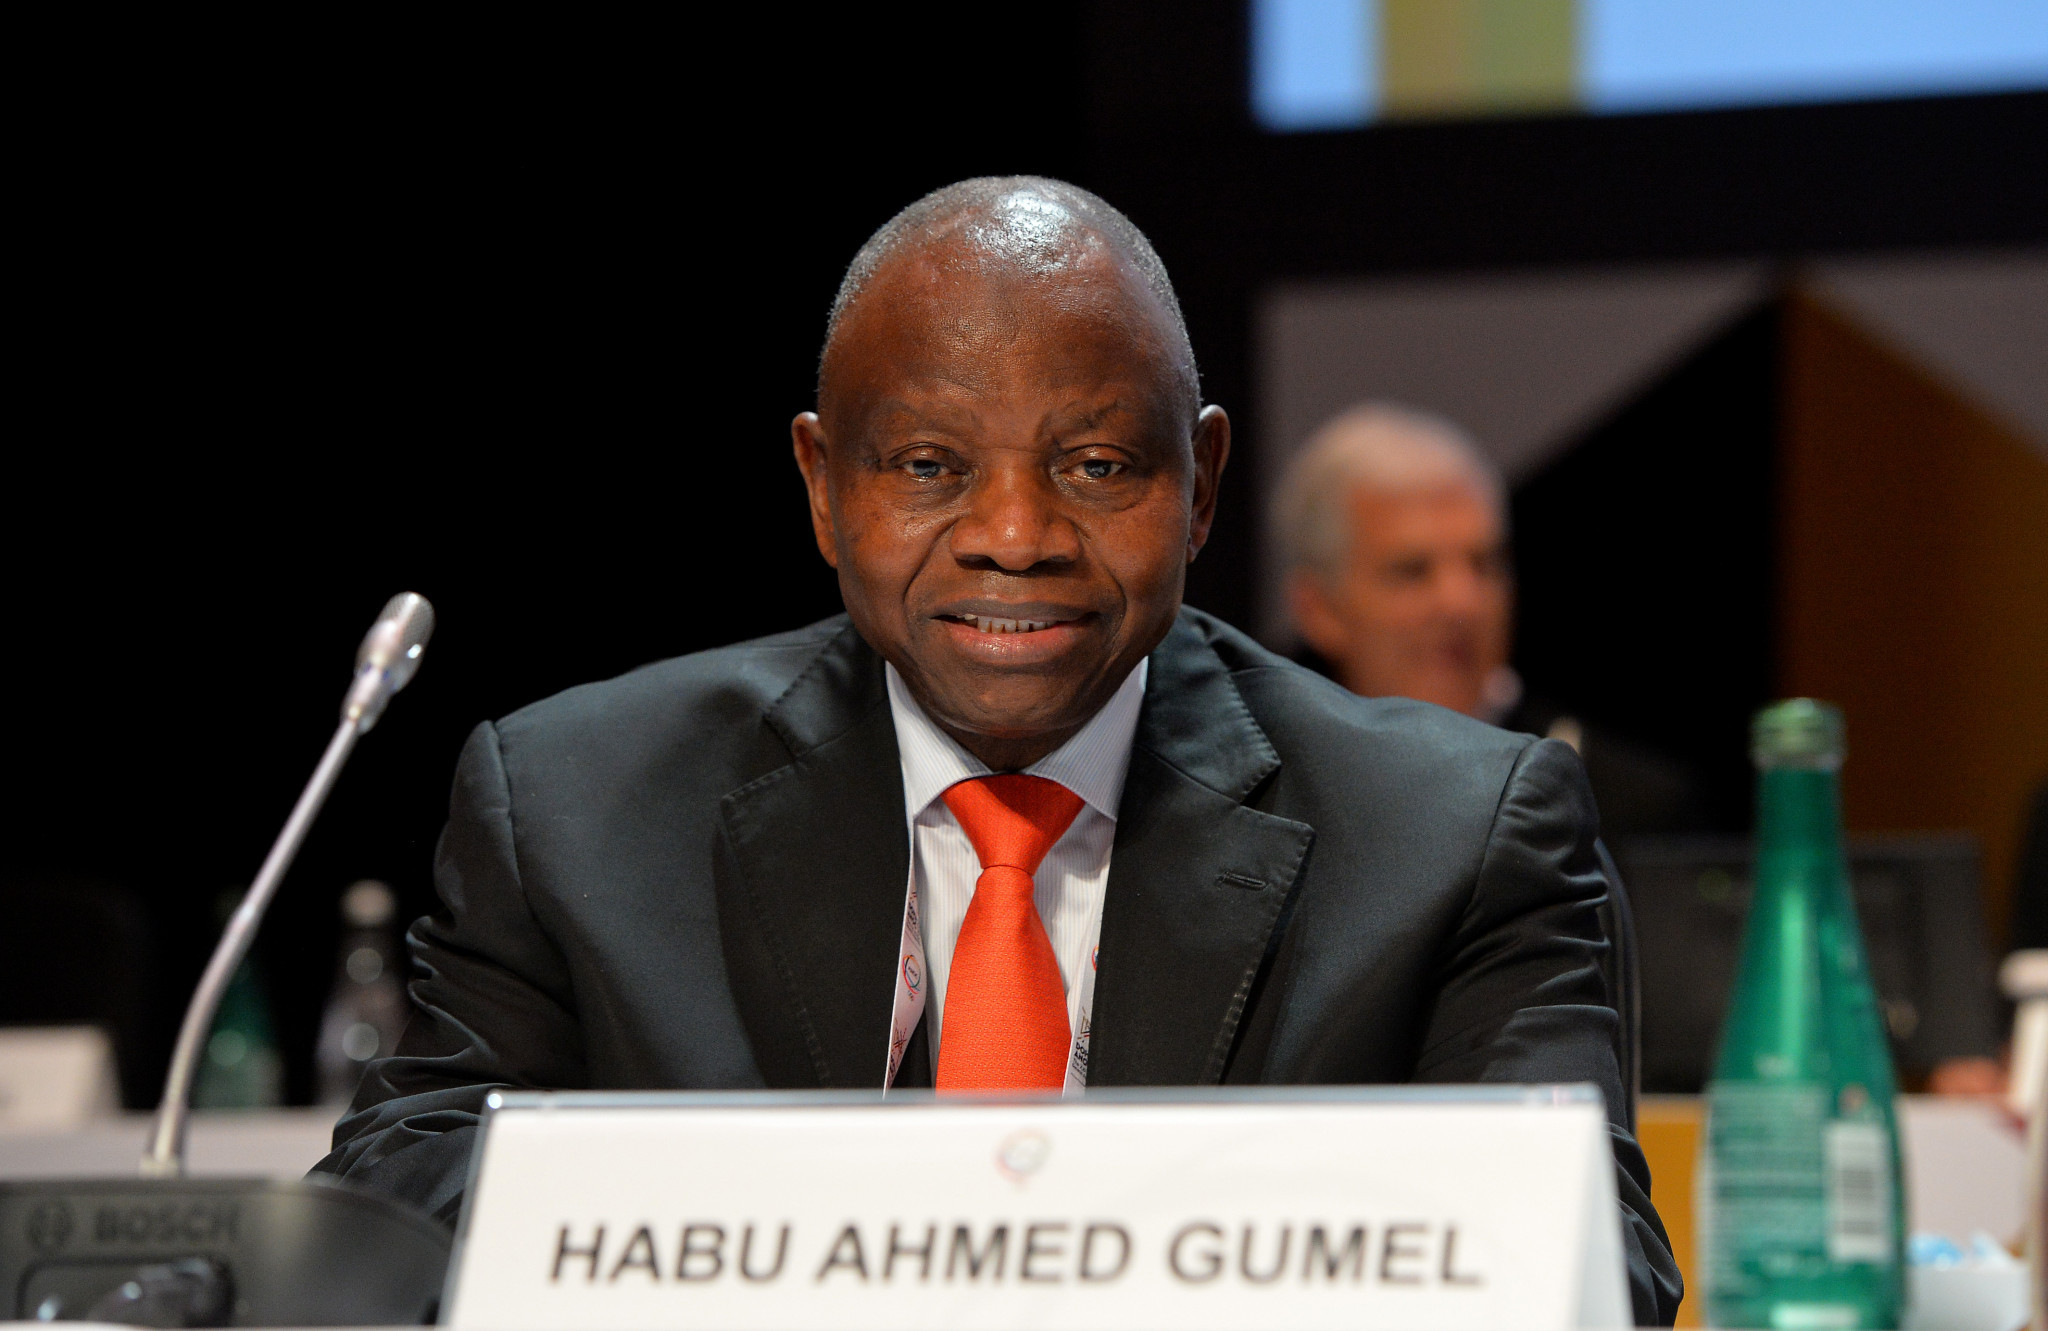 Habu Gumel, head of both the Nigeria Olympic Committee and Nigeria Teqball Federation, wants to develop the game in Africa ©Getty Images